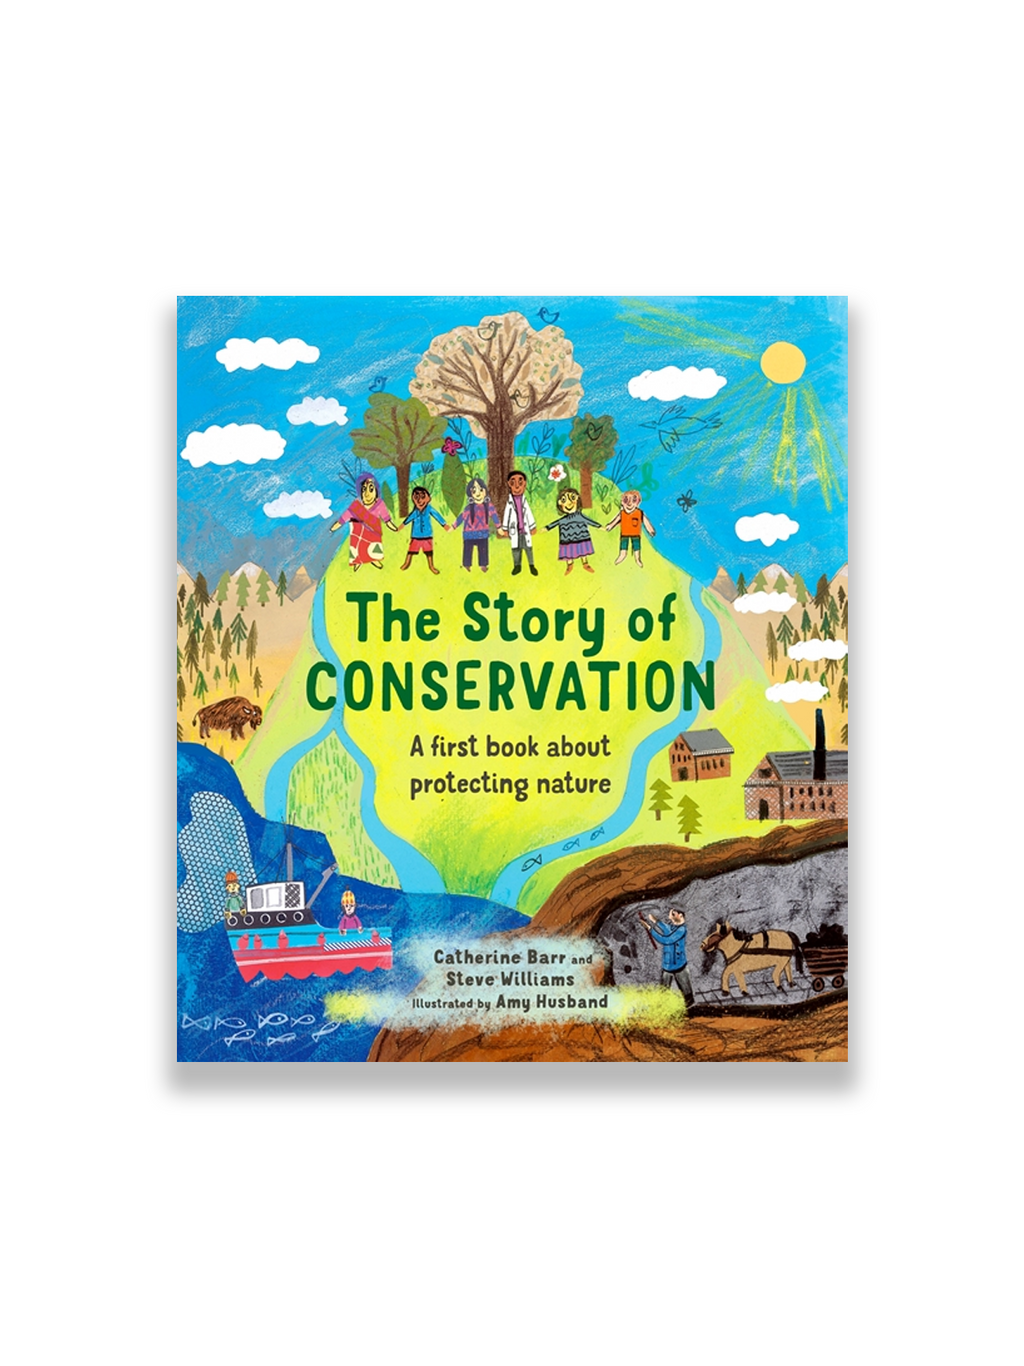 The Story of Conservation